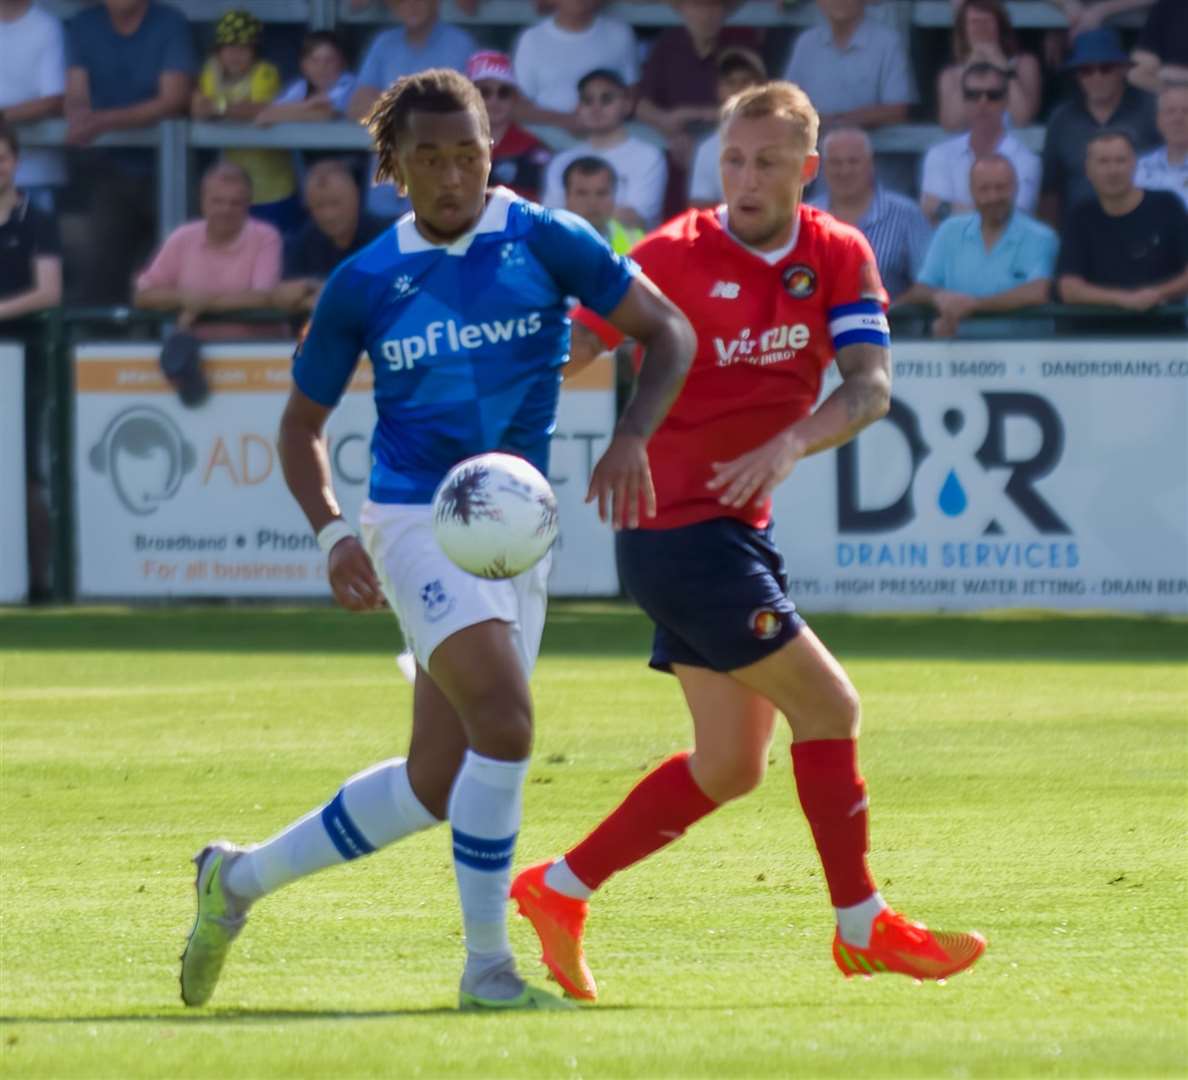 Chris Solly in action during Fleet’s defeat to Wealdstone in September. Dennis Kutrieb’s side got their own back with a 2-0 win at the weekend. Picture: Ed Miller/EUFC